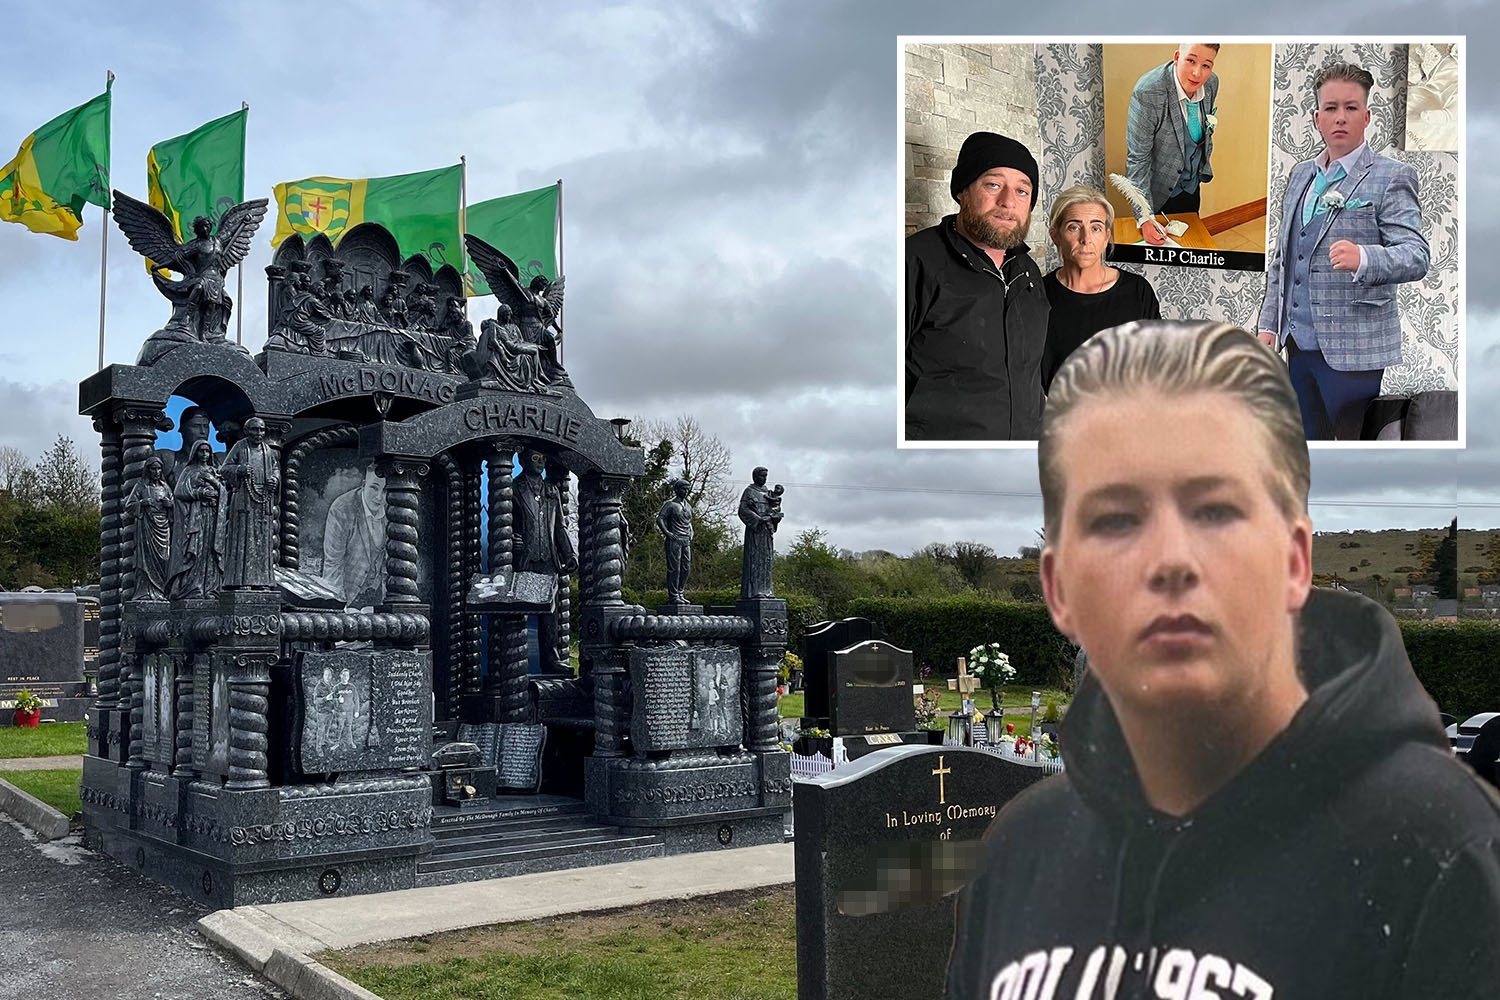 ‘Shame it’s come to this’  Furious locals boycott church over mega gravestone for cancer victim as council’s hands tied [Video]